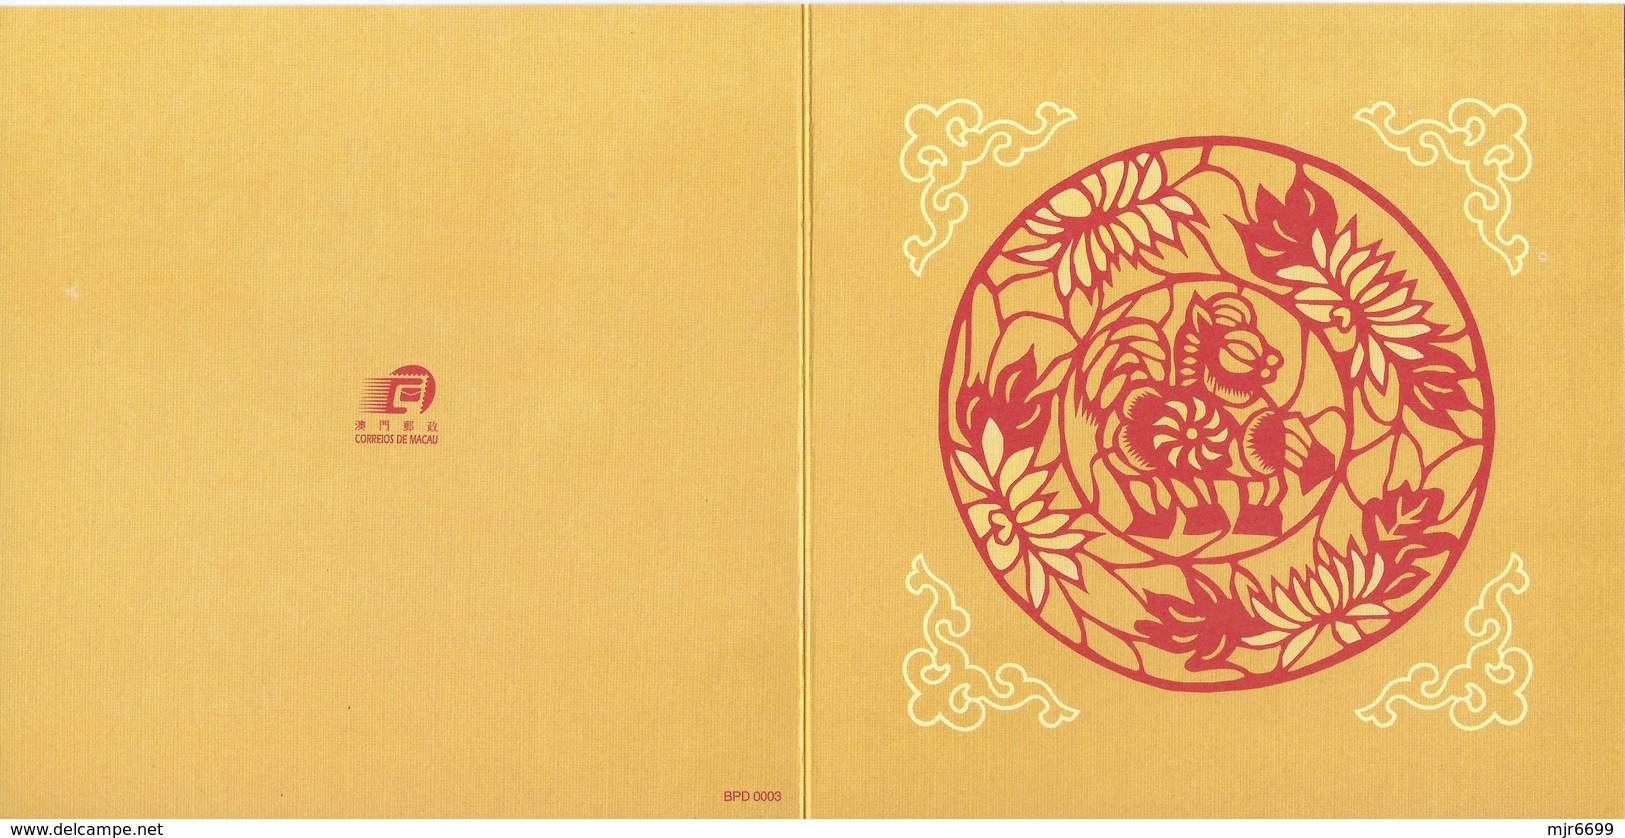 MACAU 2002 LUNAR NEW YEAR OF THE HORSE GREETING CARD & POSTAGE PAID COVER, LOCAL USAGE,  POST OFFICE CODE #BPD003 - Ganzsachen